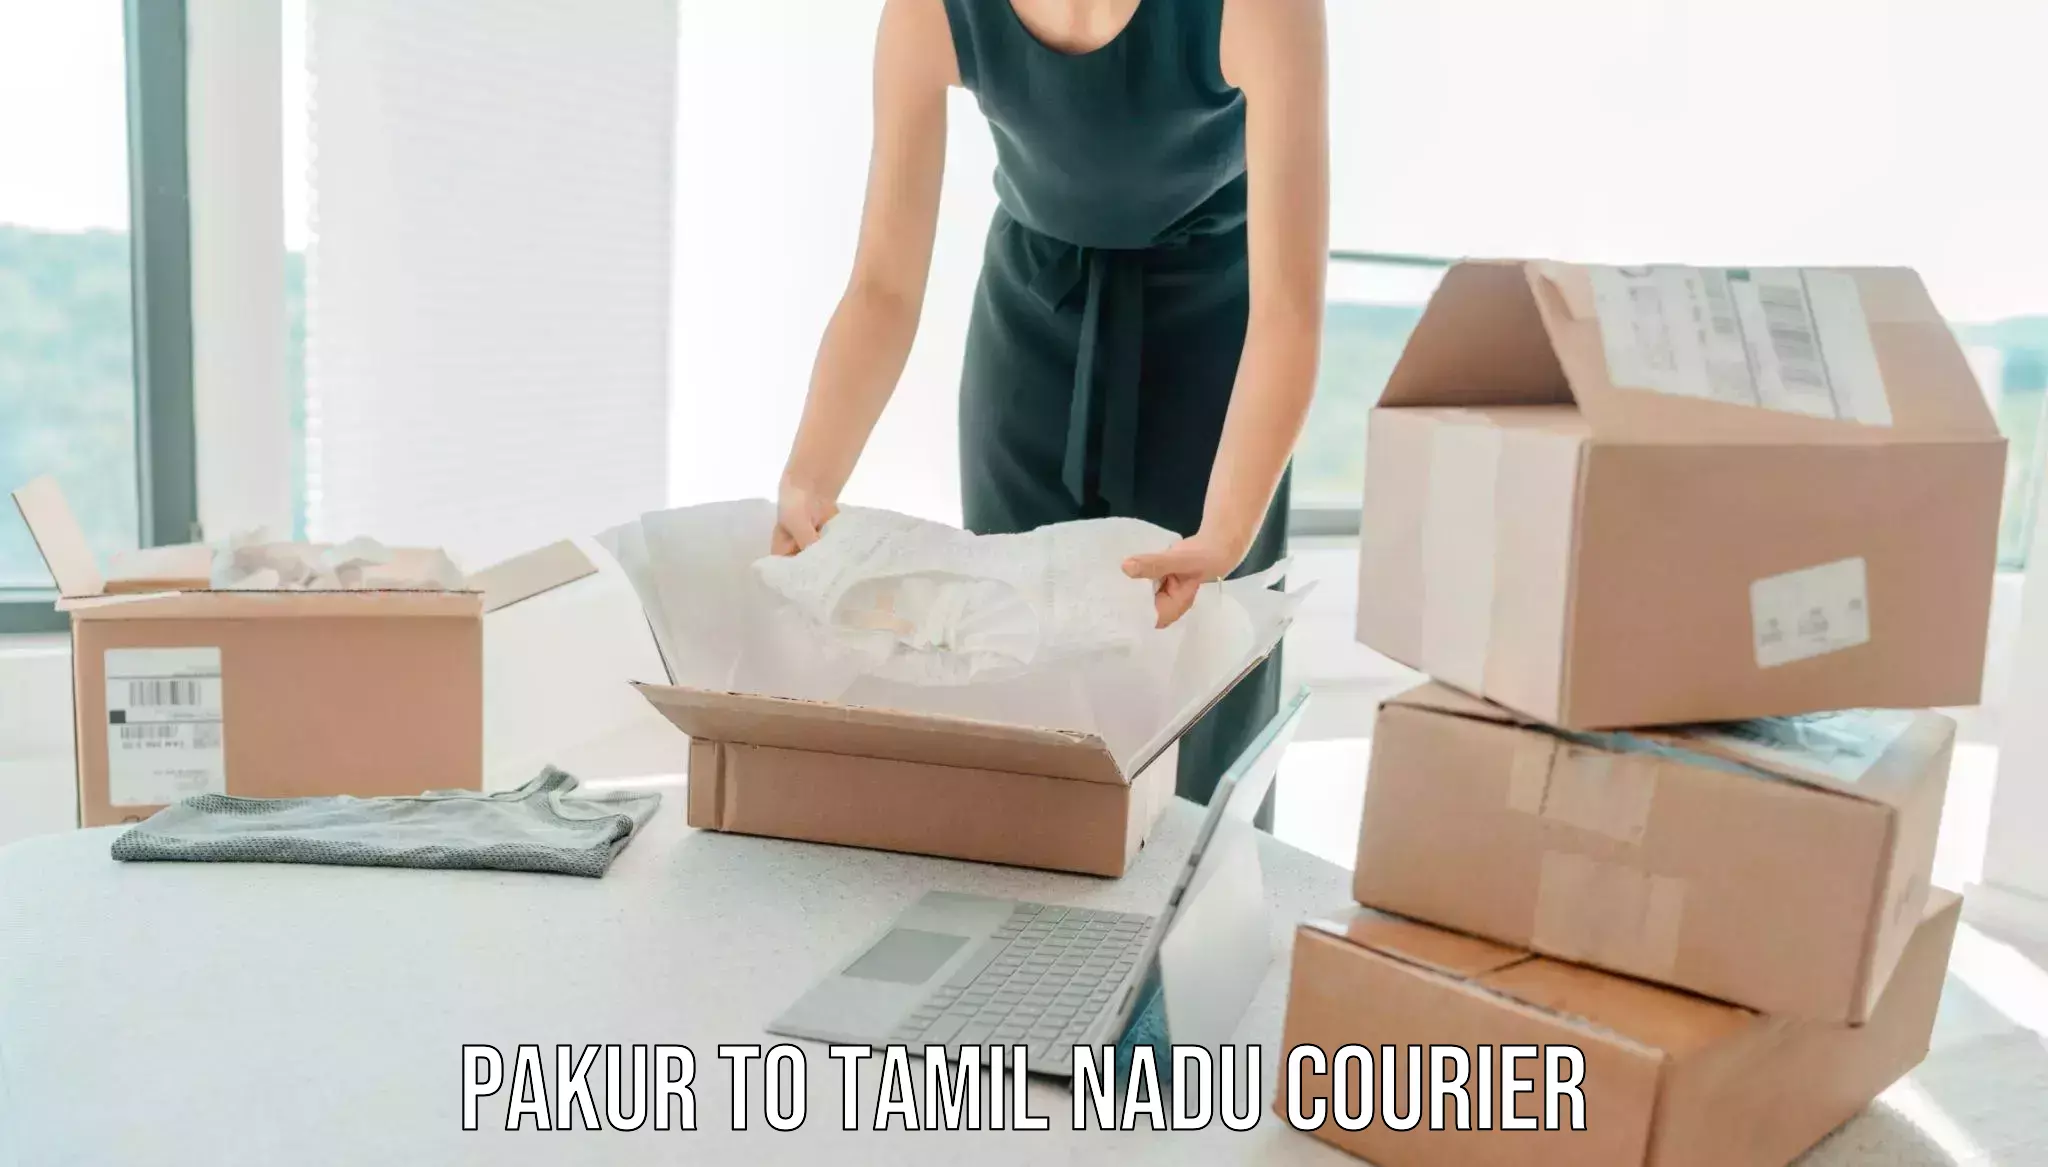 Affordable relocation services in Pakur to Tamil Nadu